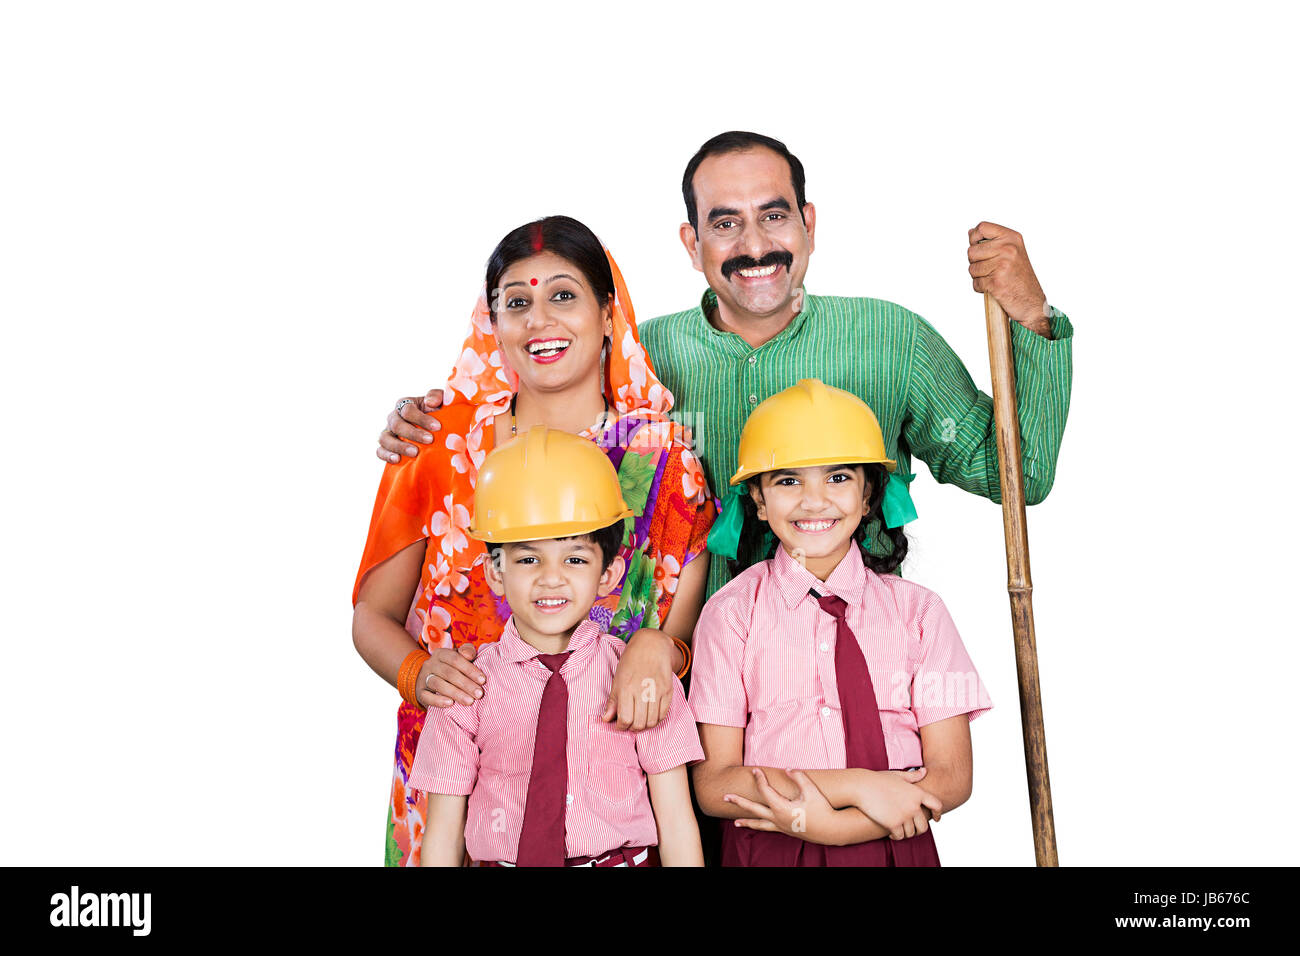 Indian Rural Farmer Family- Parents and 2 Kids Standing Together. Kids Students Wearing Helmet Dreaming Architect Stock Photo